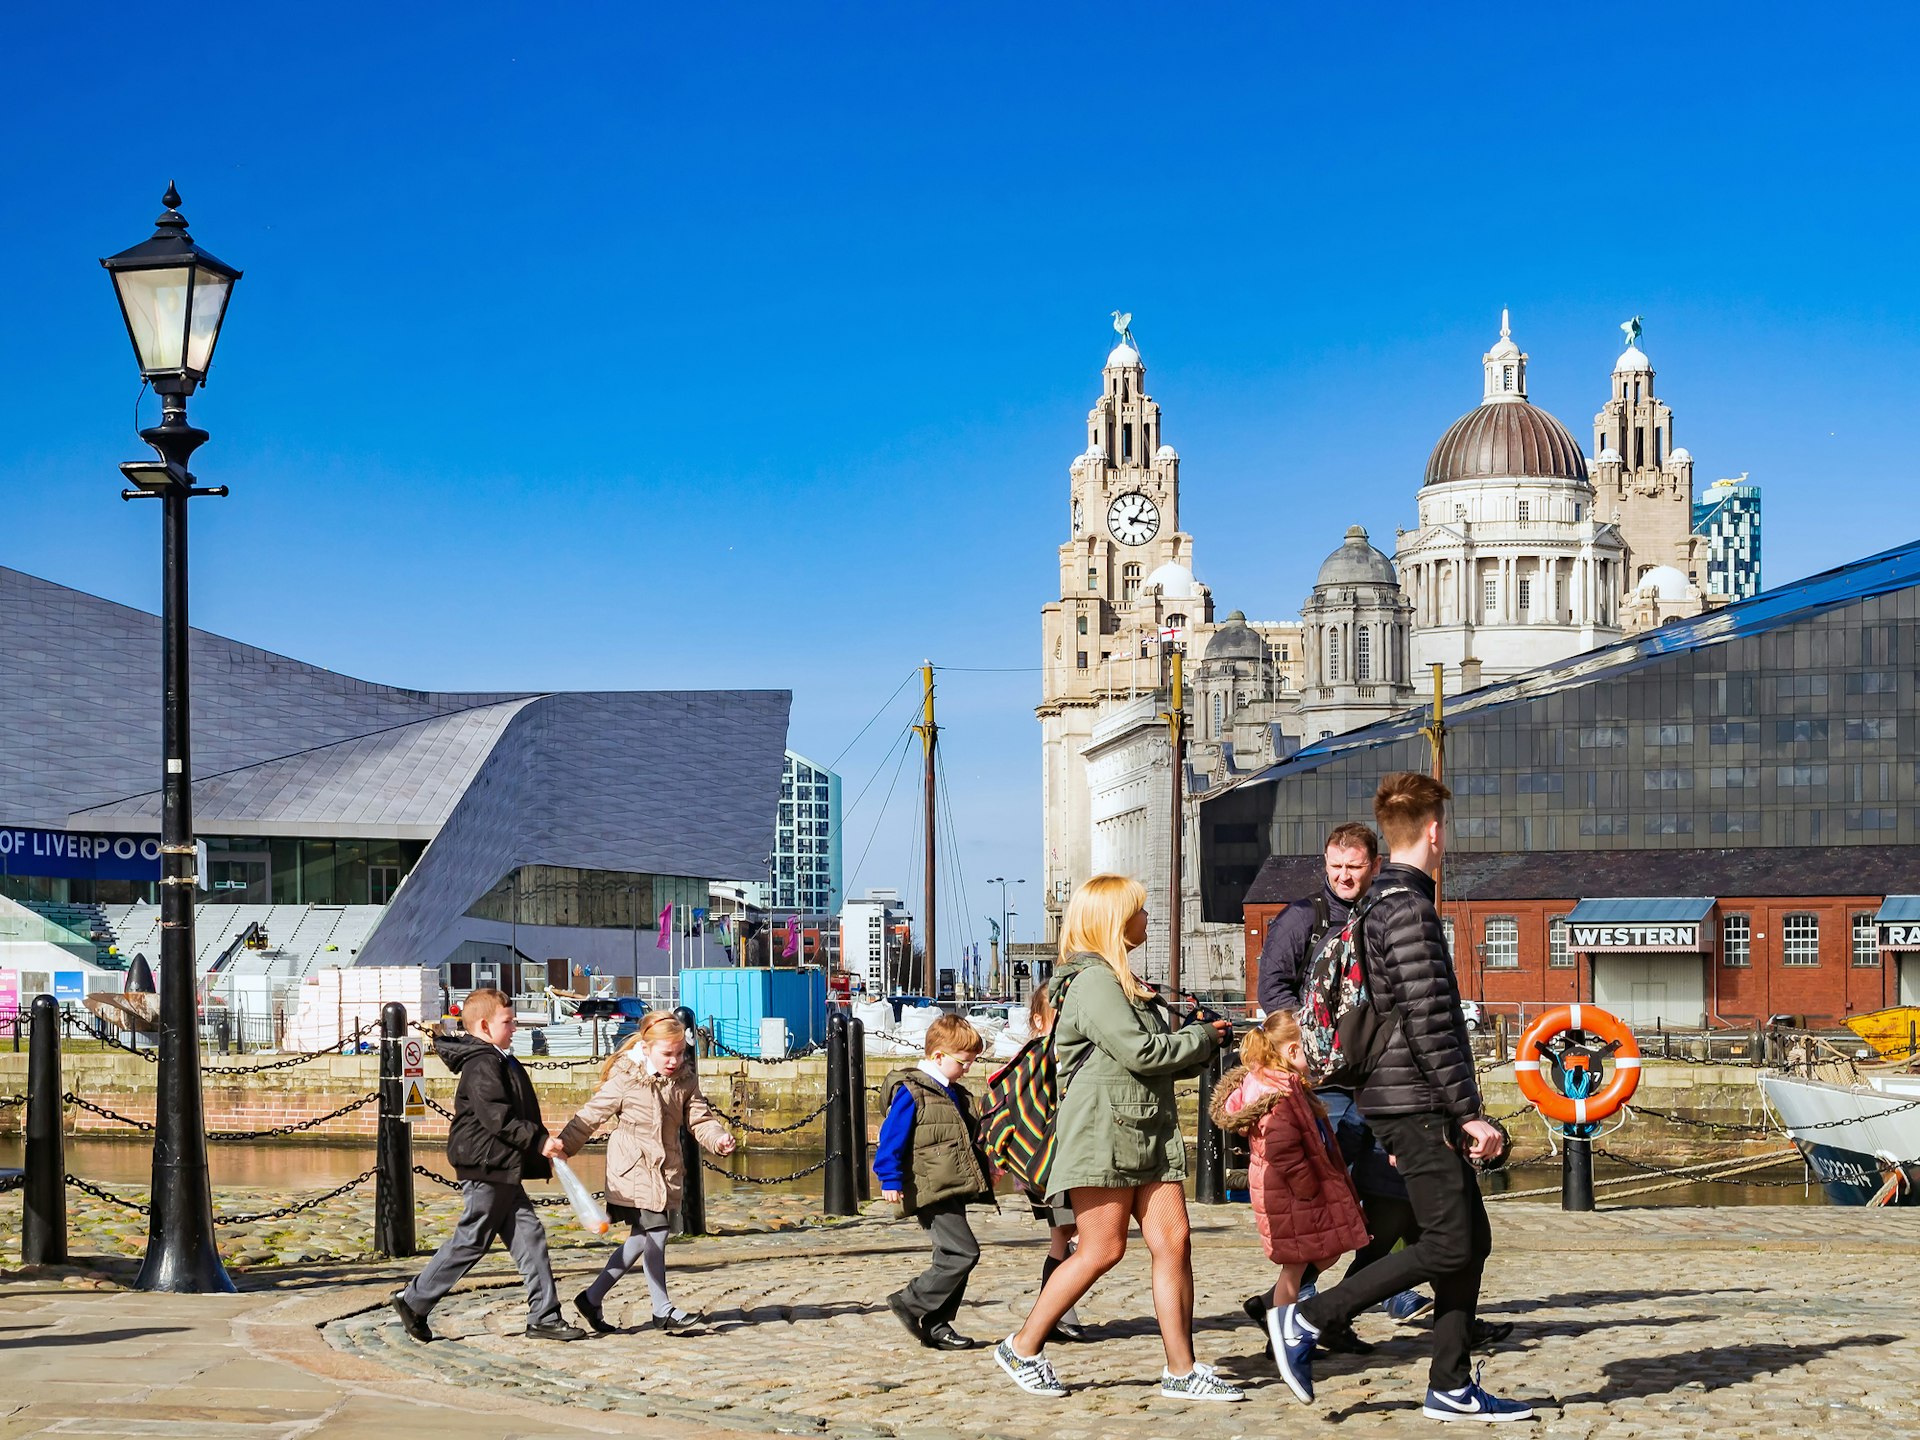 A view of the Albert Dock and Pier Head area at the Port of Liverpool and Royal Liver building part of the well known "The three Graces".